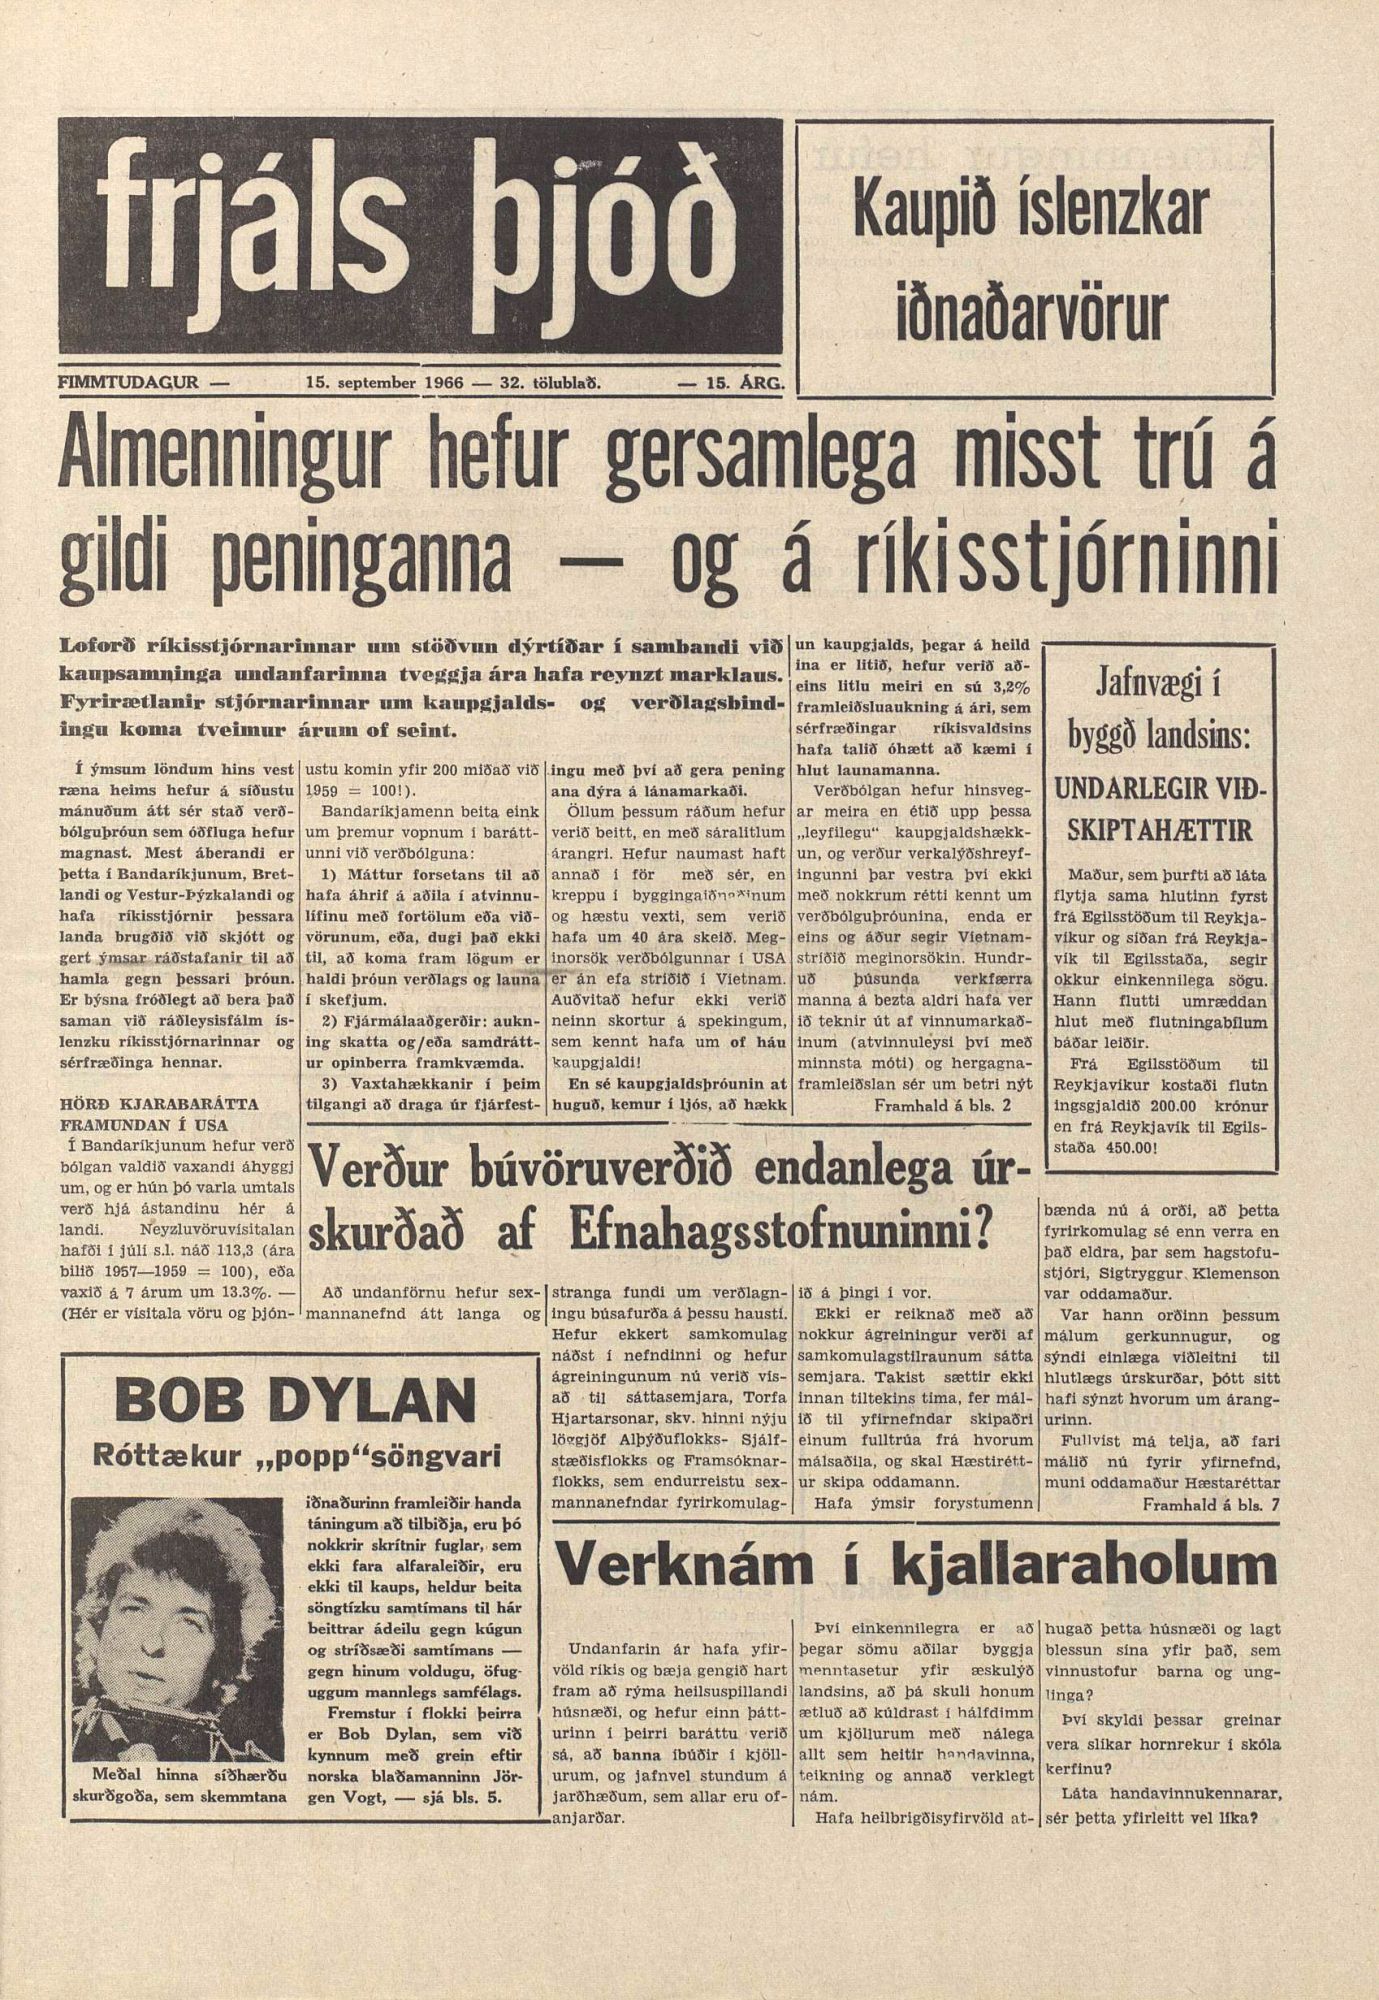 frjals bjod iceland magazine Bob Dylan front cover